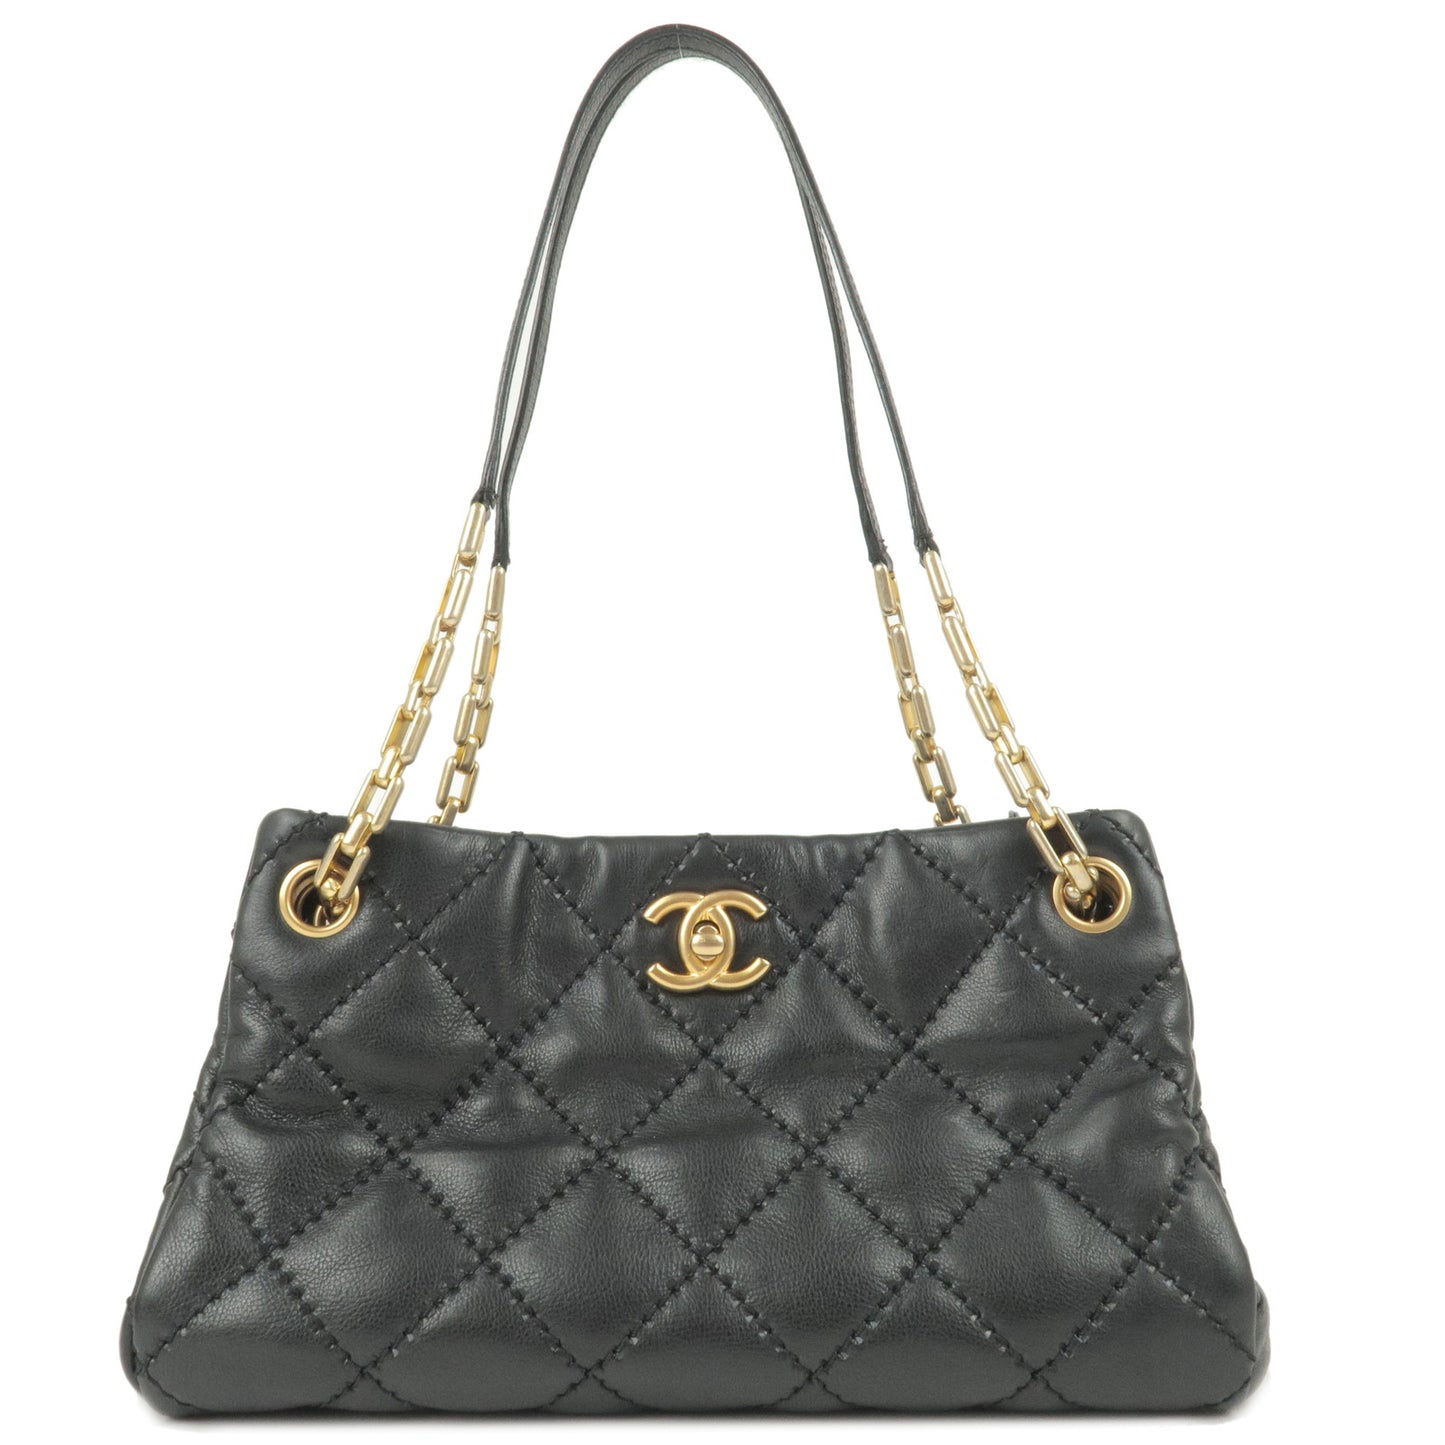 CHANEL-Ultra-Stitch-Quilted-Leather-Chain-Shoulder-Bag-Black